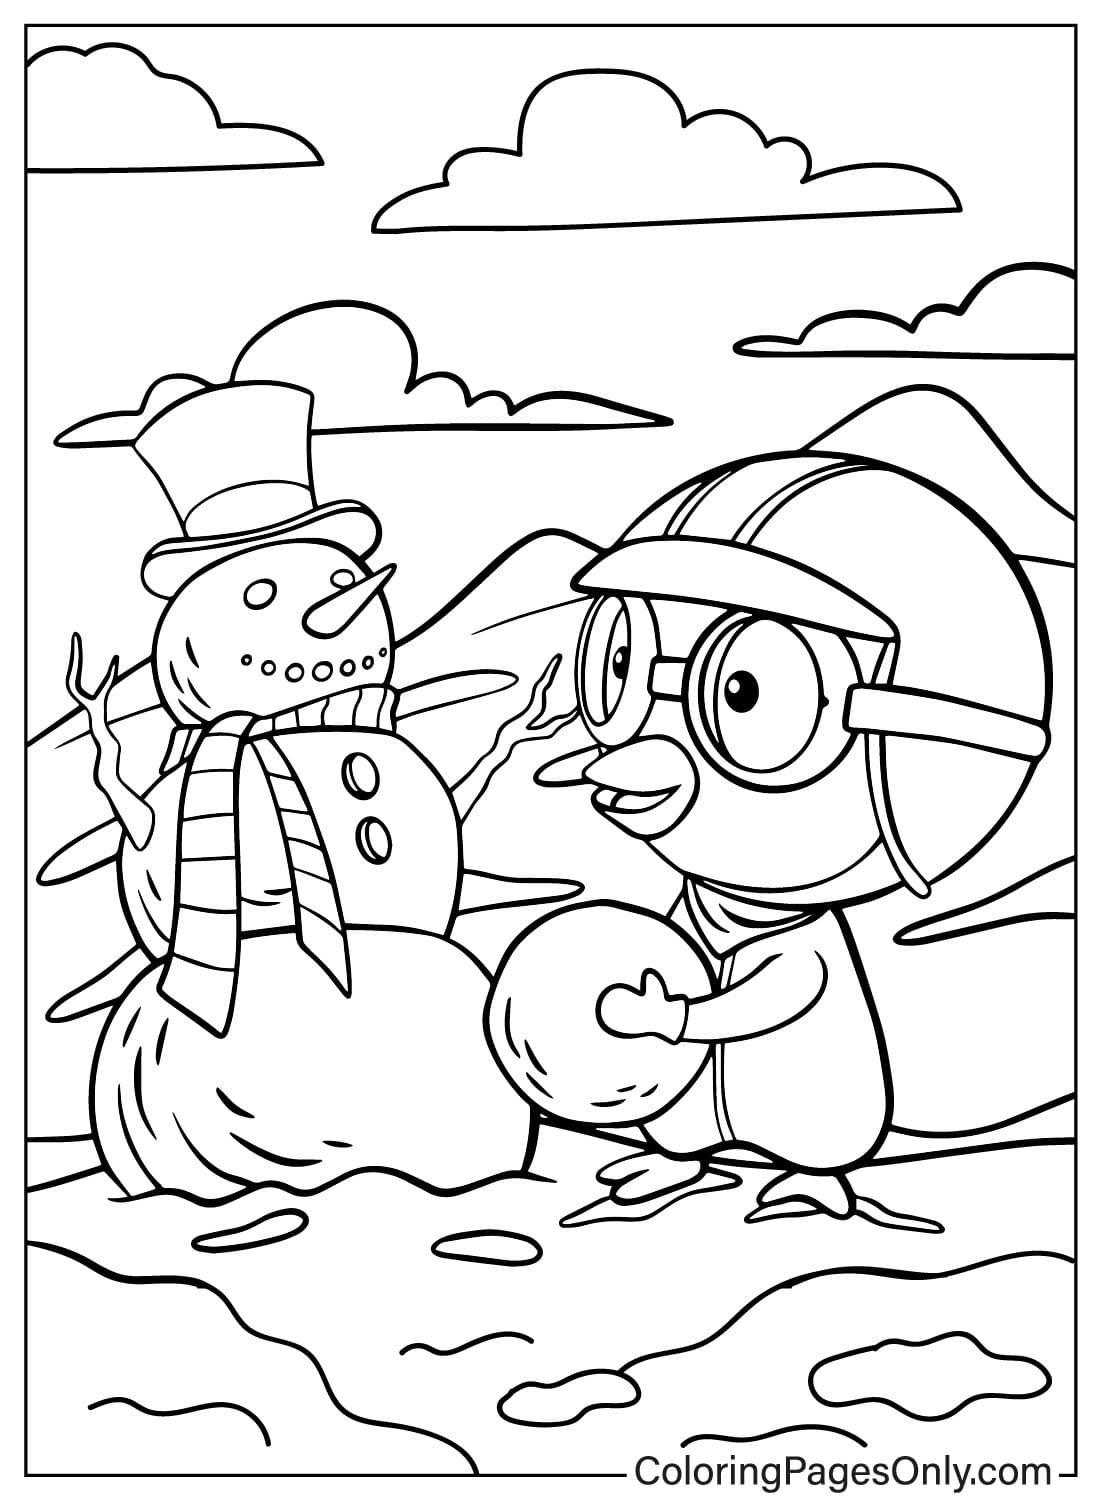 Pororo Coloring Page to Print from Pororo the Little Penguin